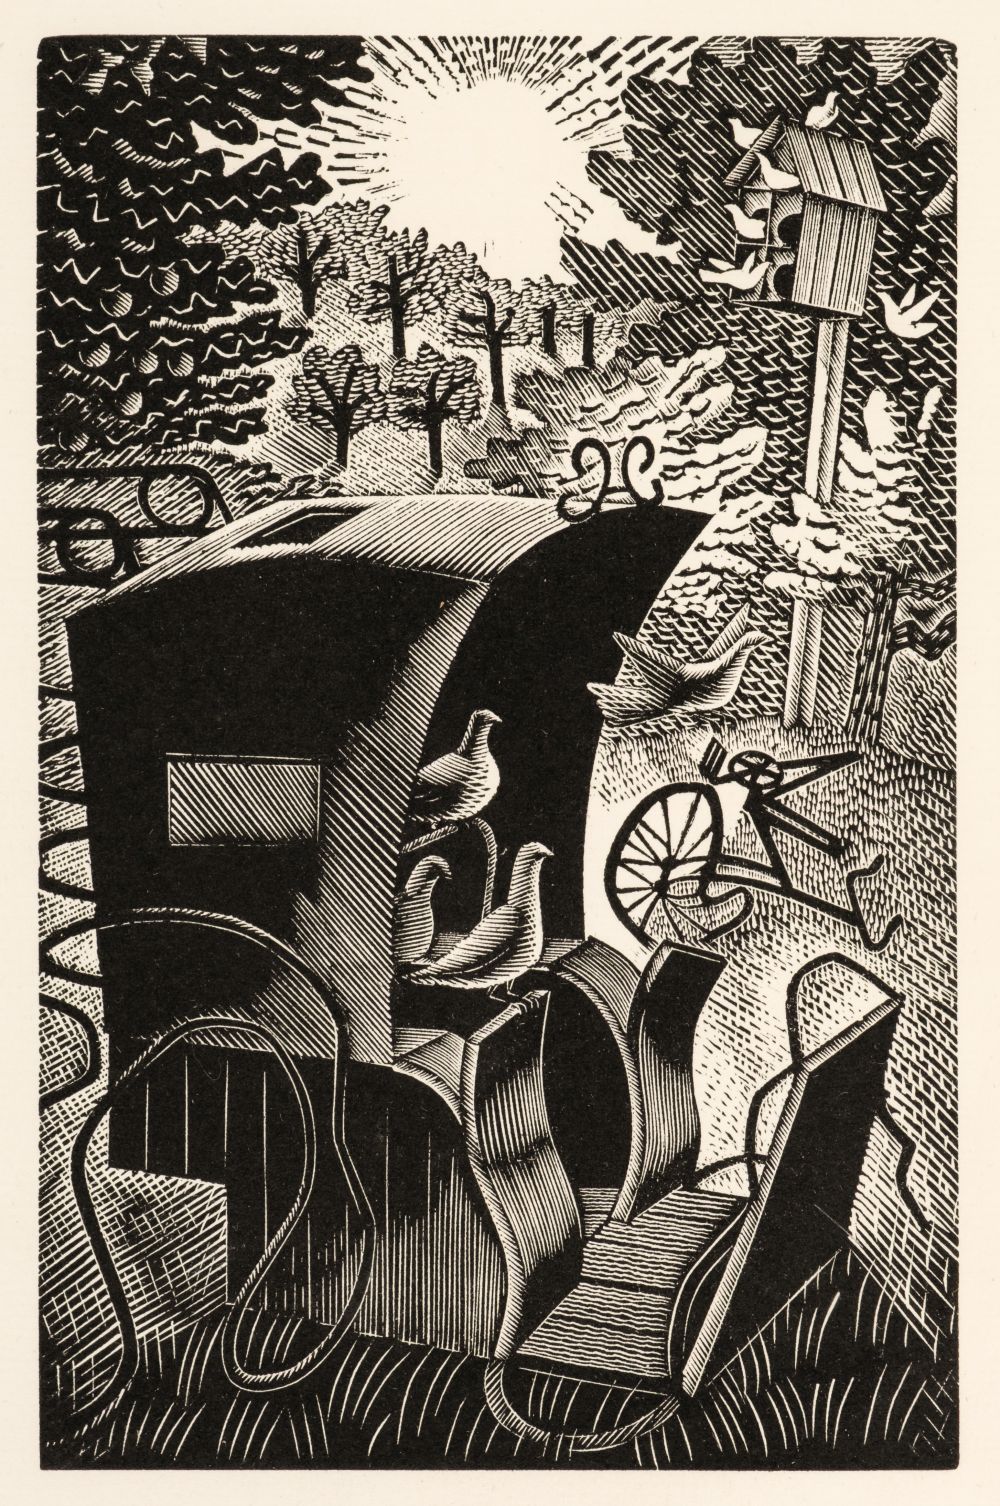 Golden Cockerel Press. The Hansom Cab and the Pigeons, 1935